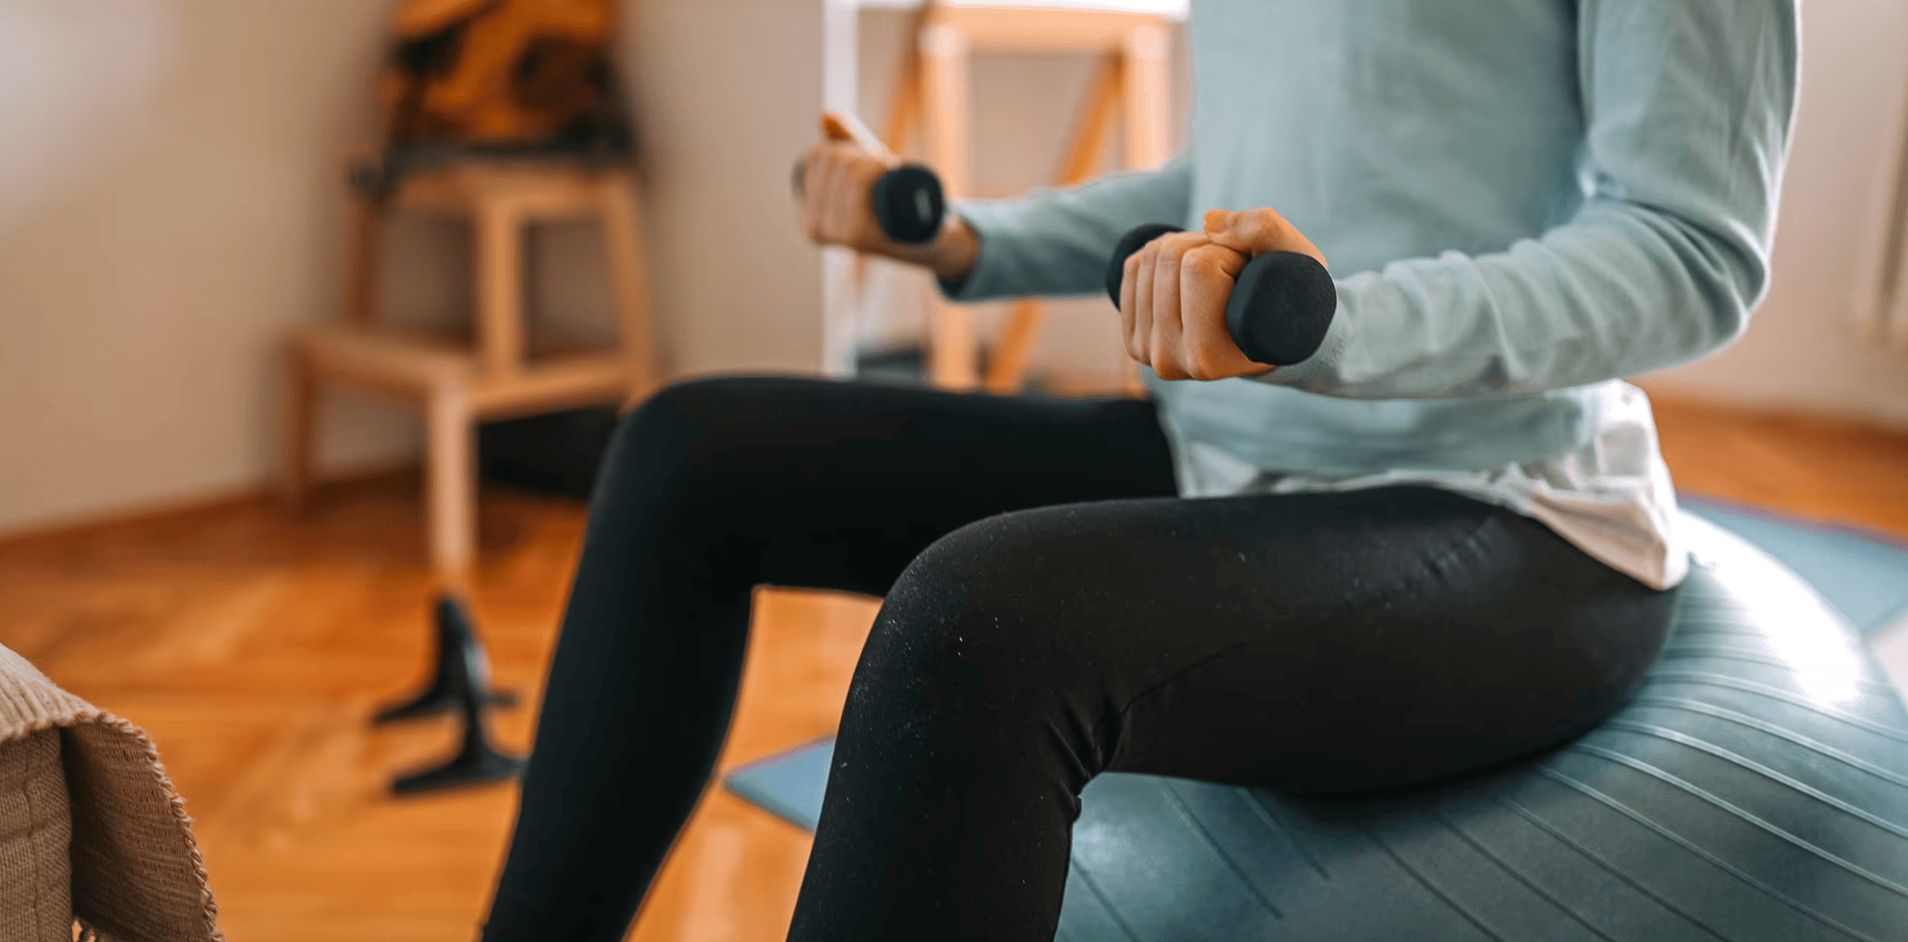 I’ve been using dumbbells for a decade — here are my top 9 picks for your home gym